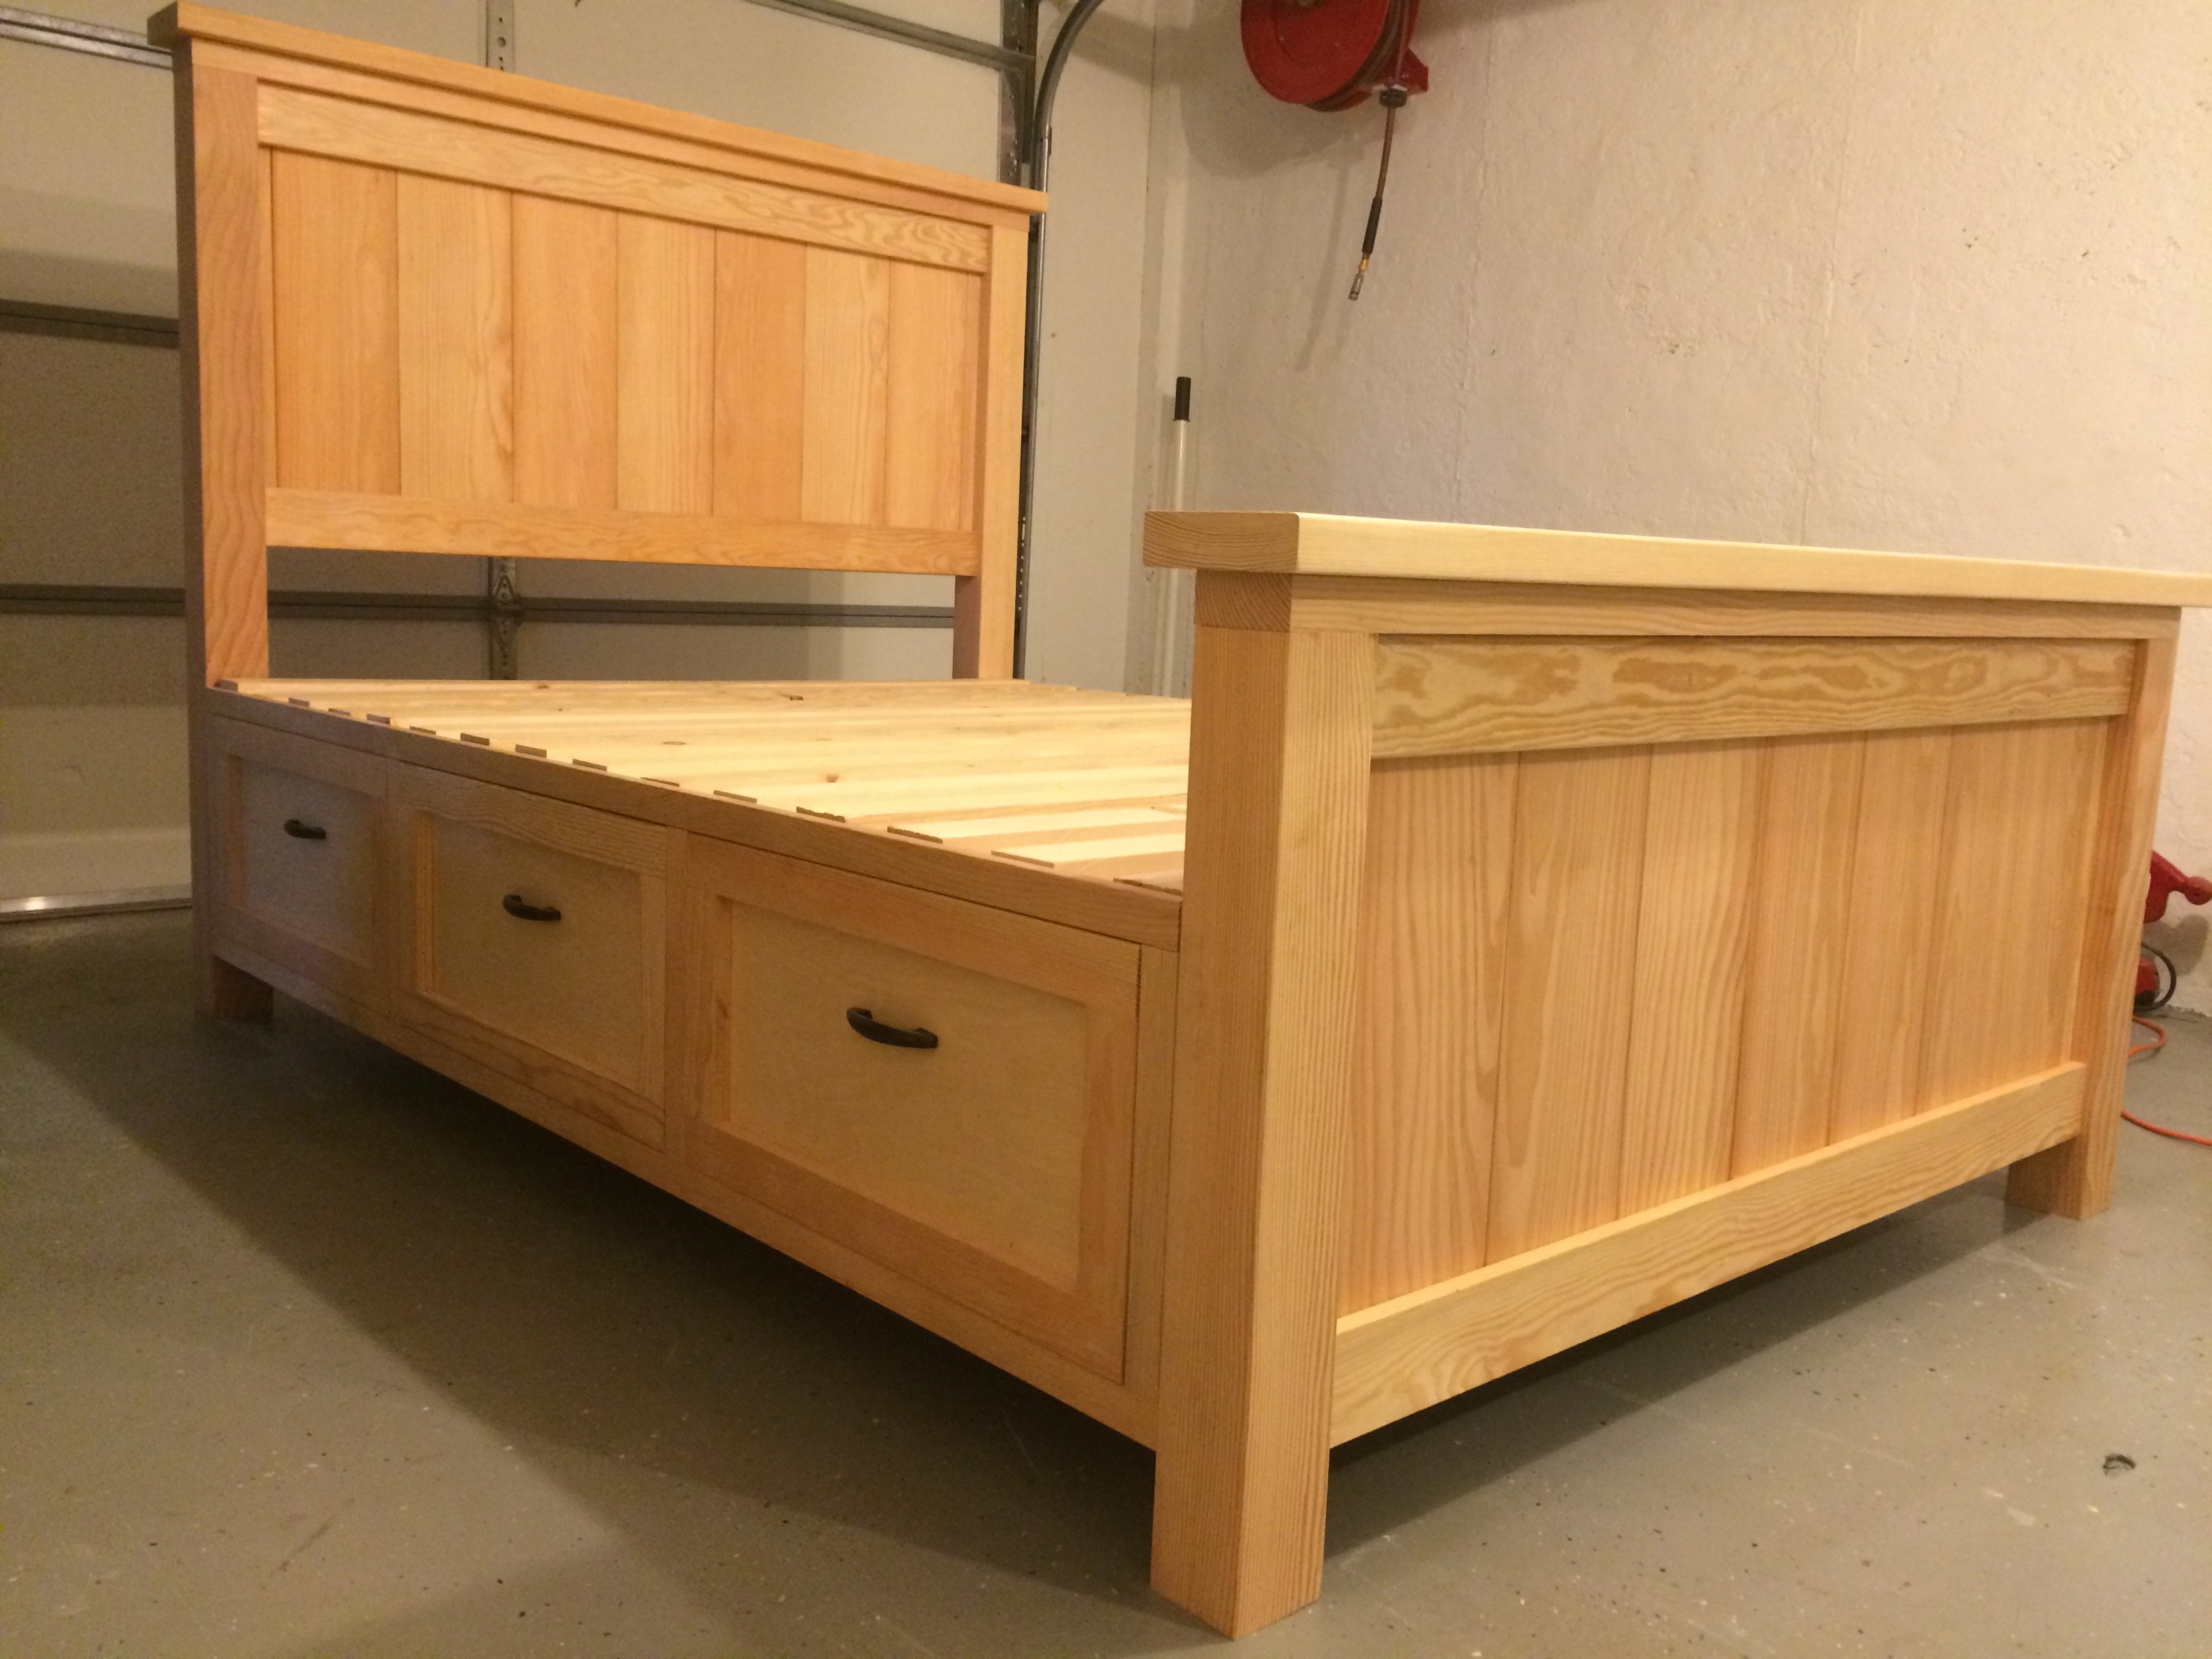 Farmhouse Storage Bed With Drawers, Queen Bed Frame With Storage Drawers And Headboard